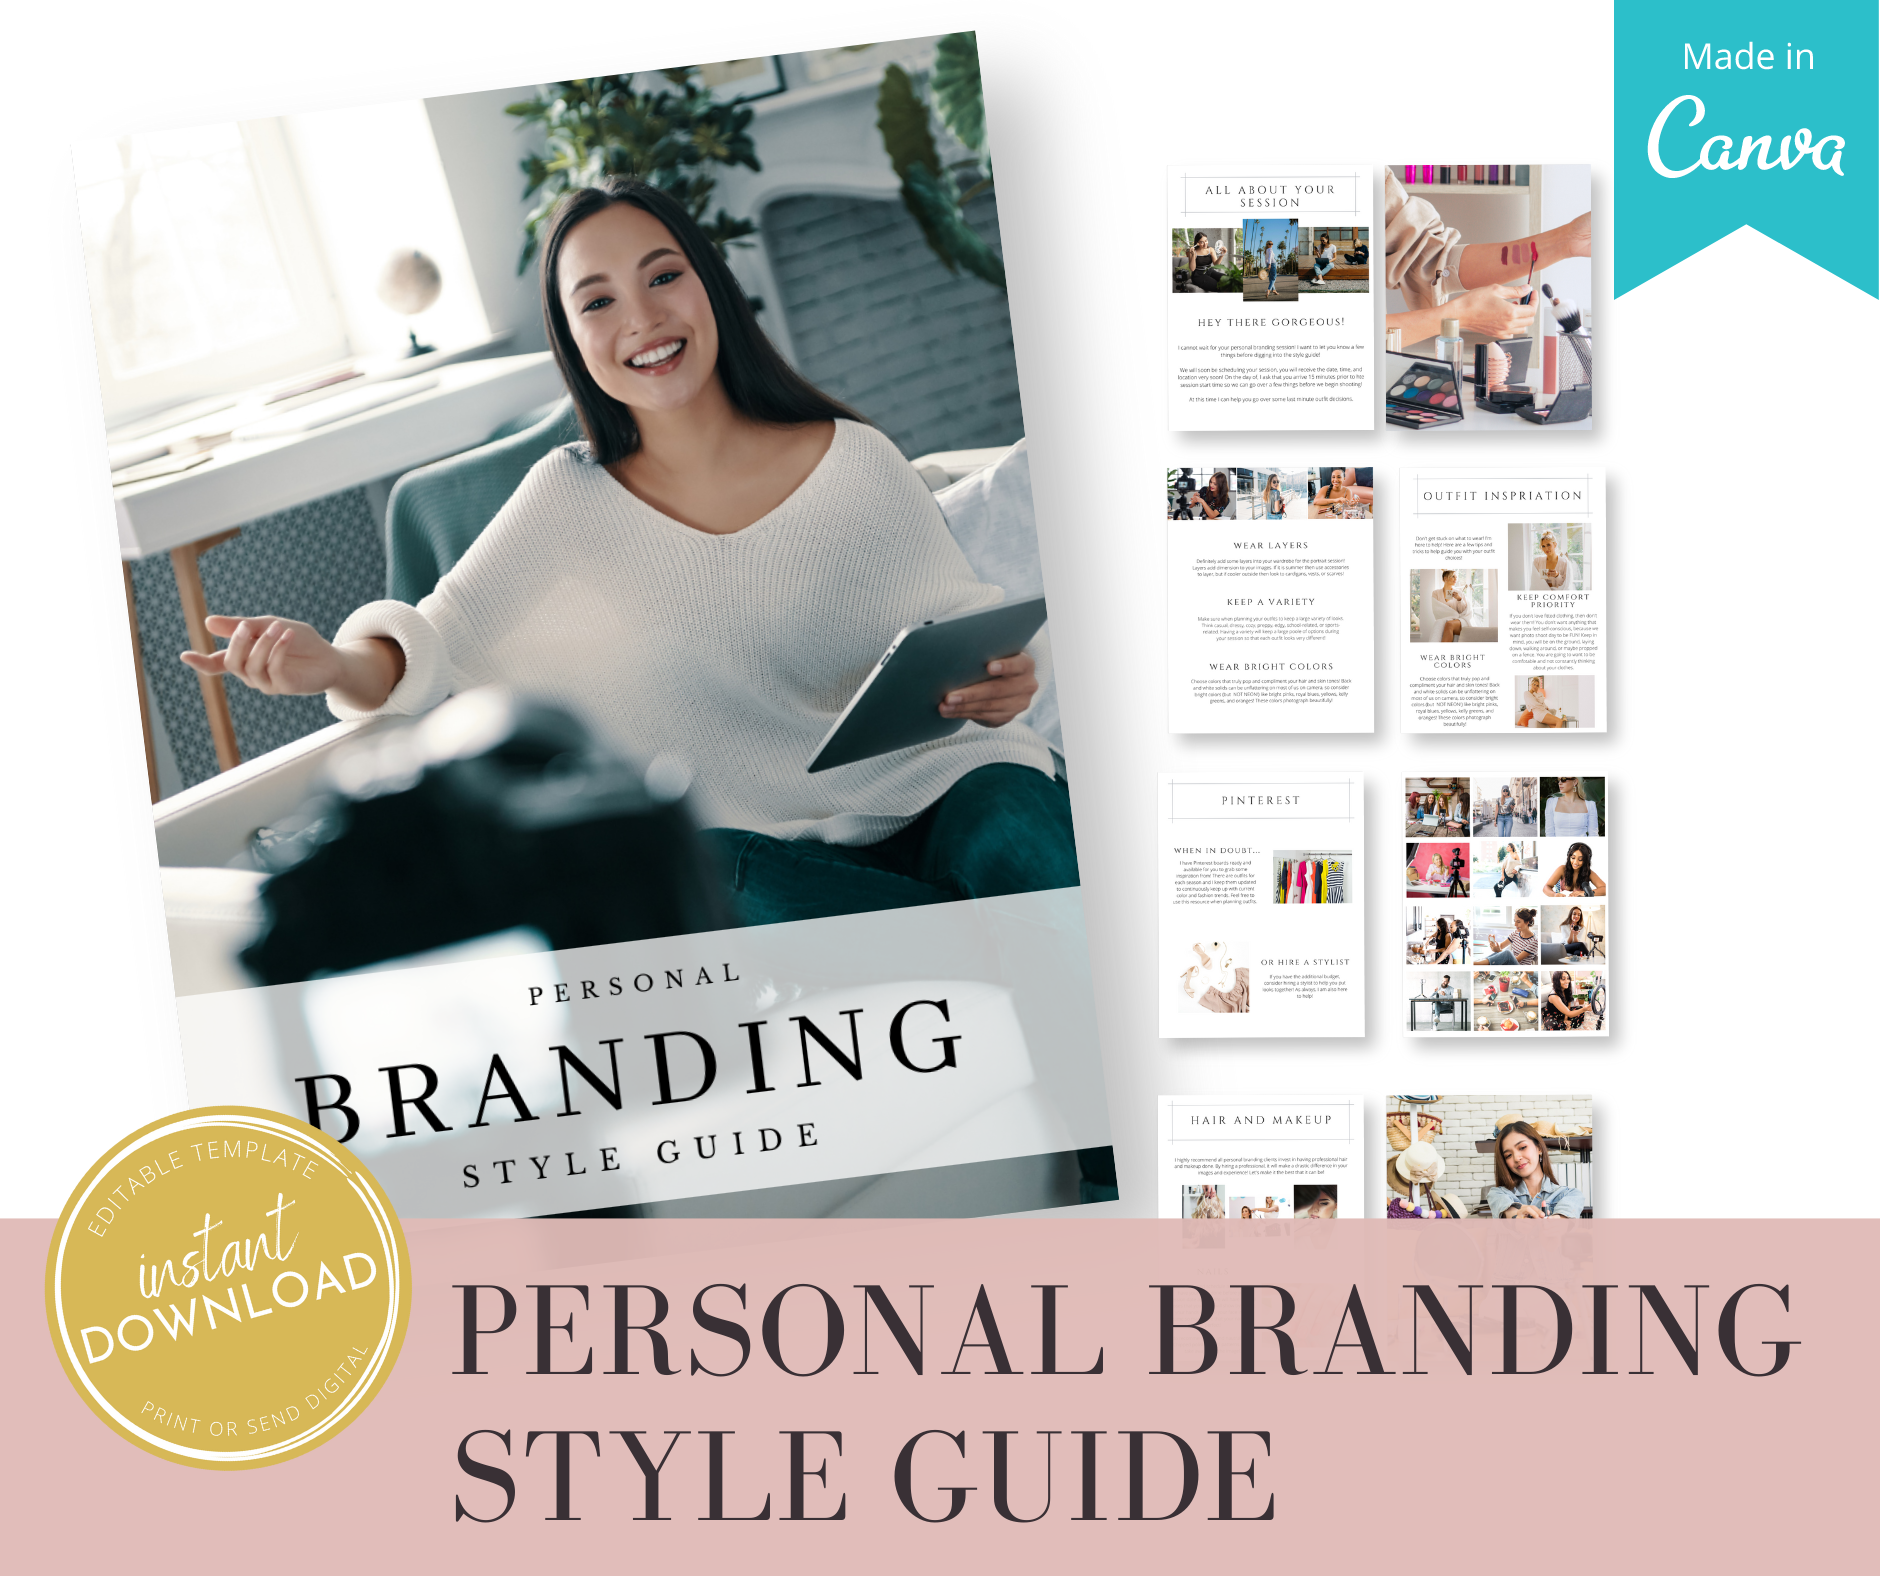 Mockup of branding style guide by Mint Magnolia Photography. Image of a lady holding an iPad and talking to a camera.